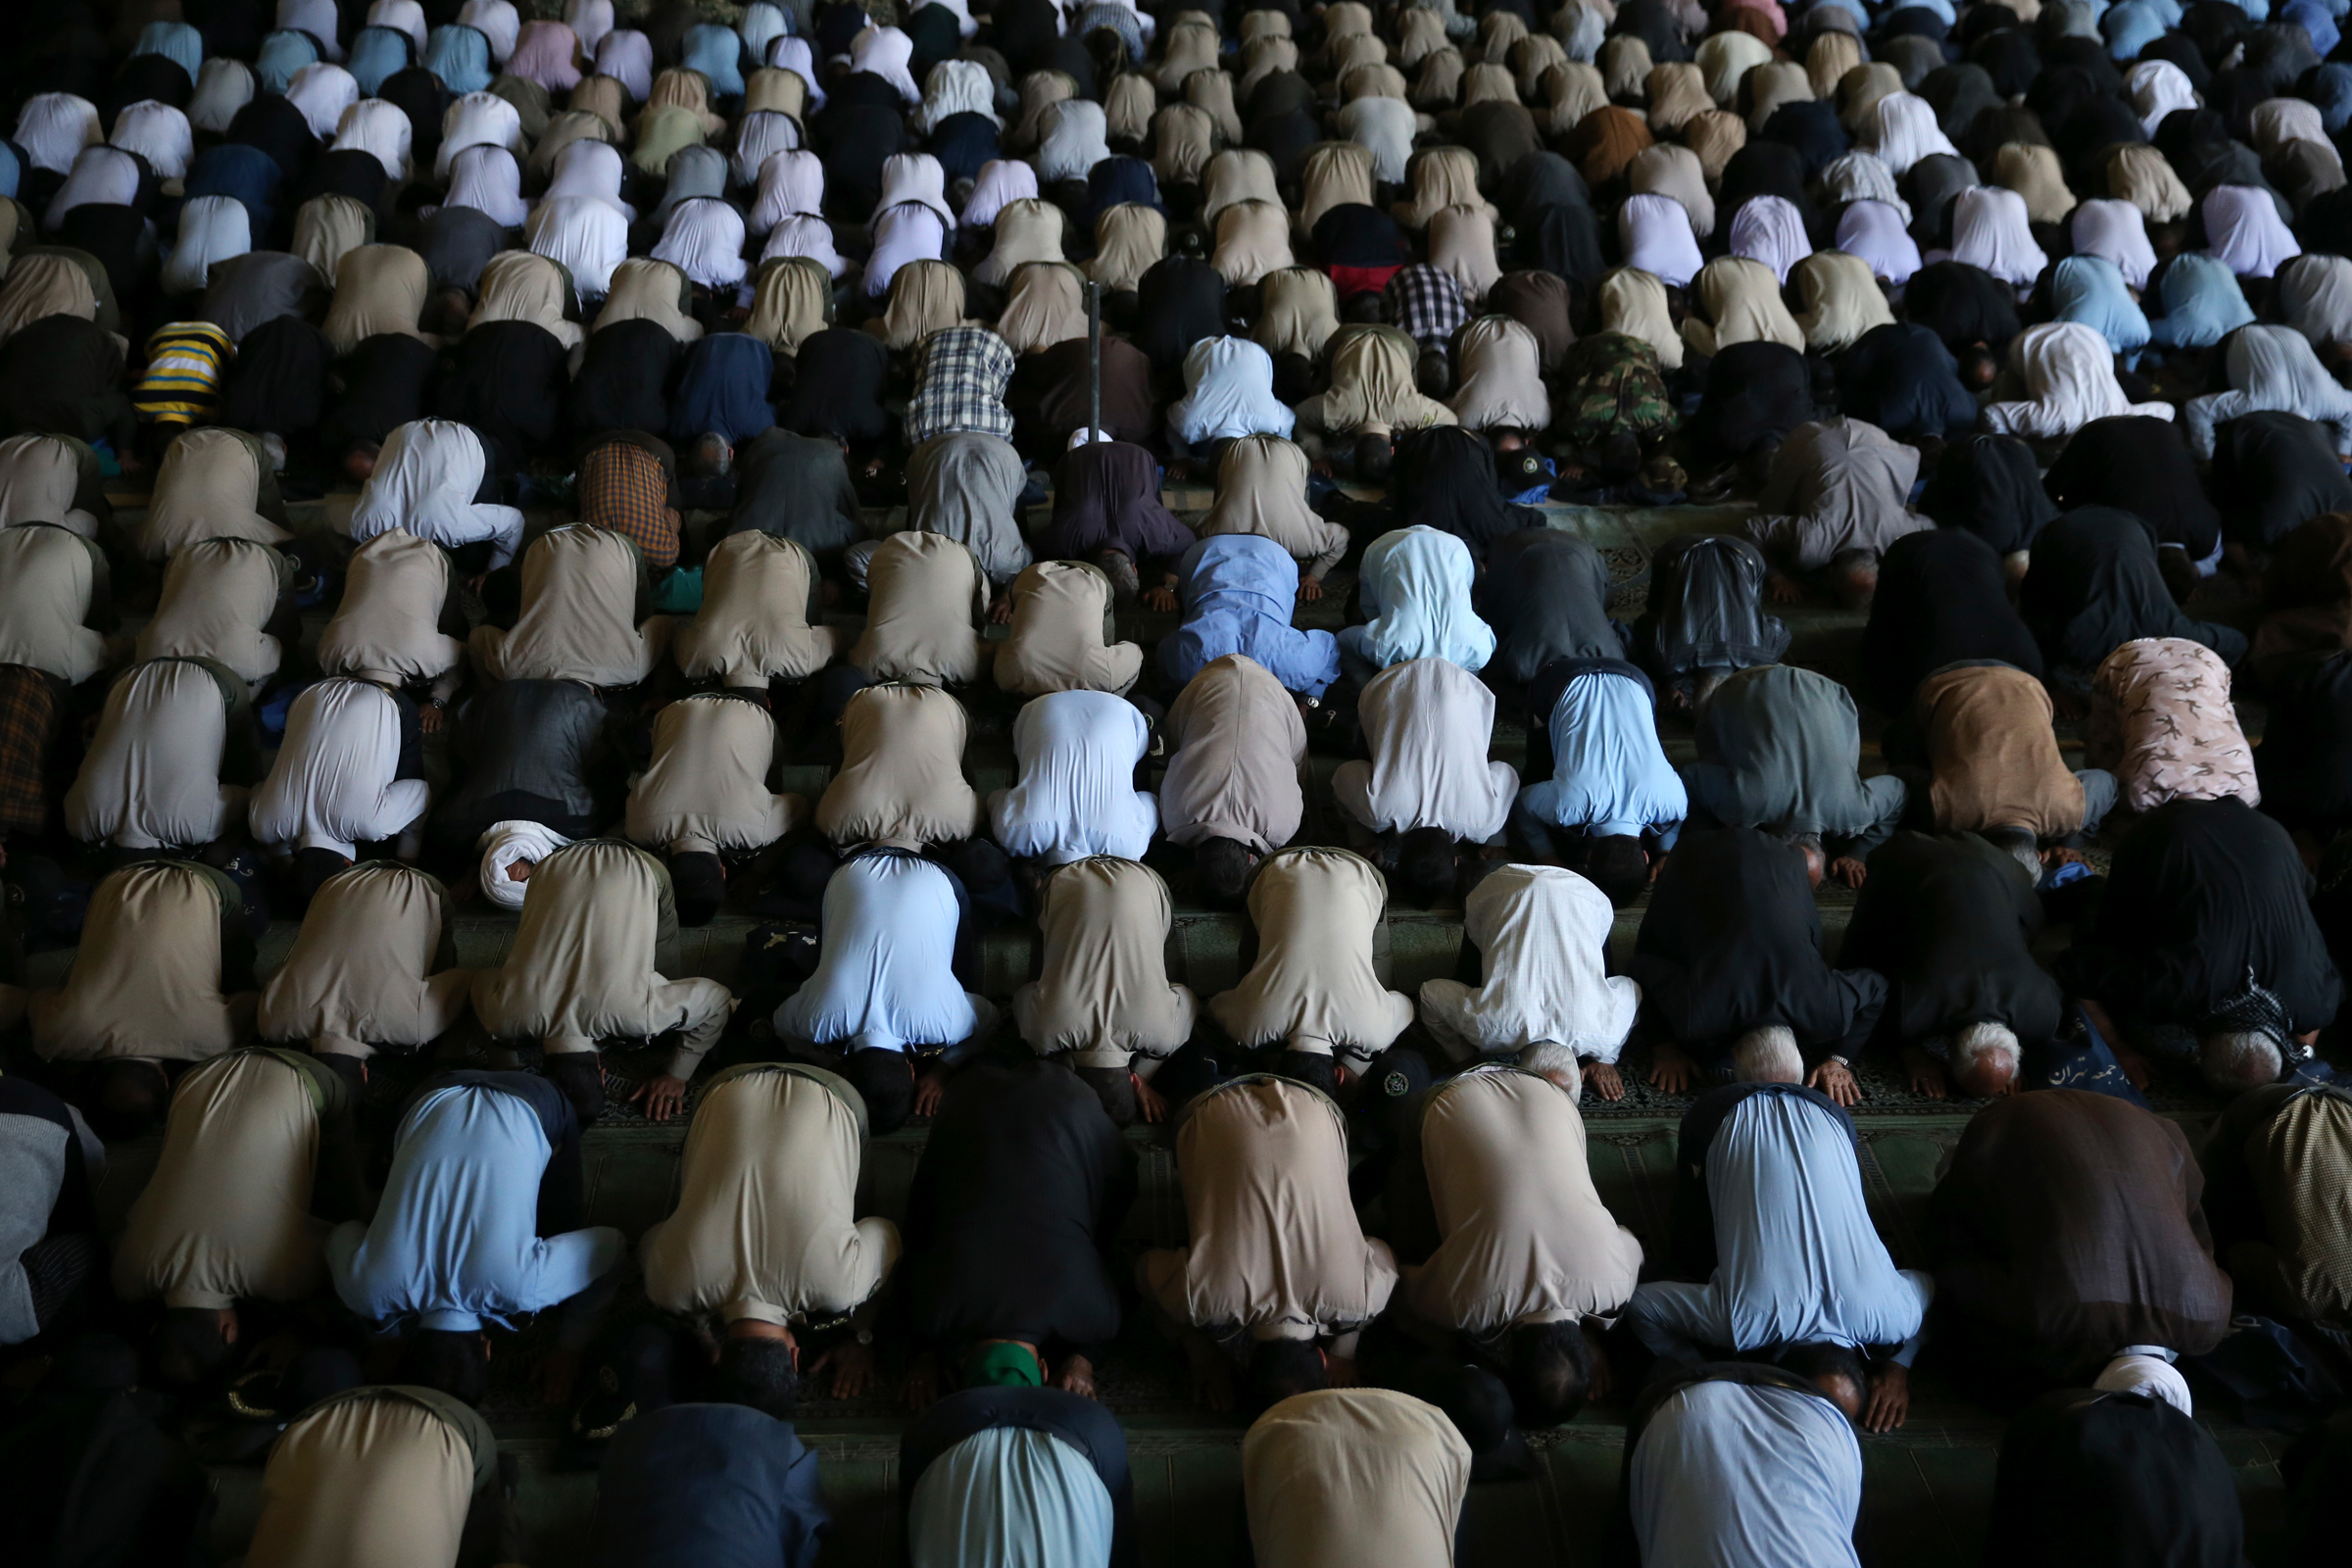 It’s Been Almost 2 Years—Tehran Holds its First Public Friday Prayers